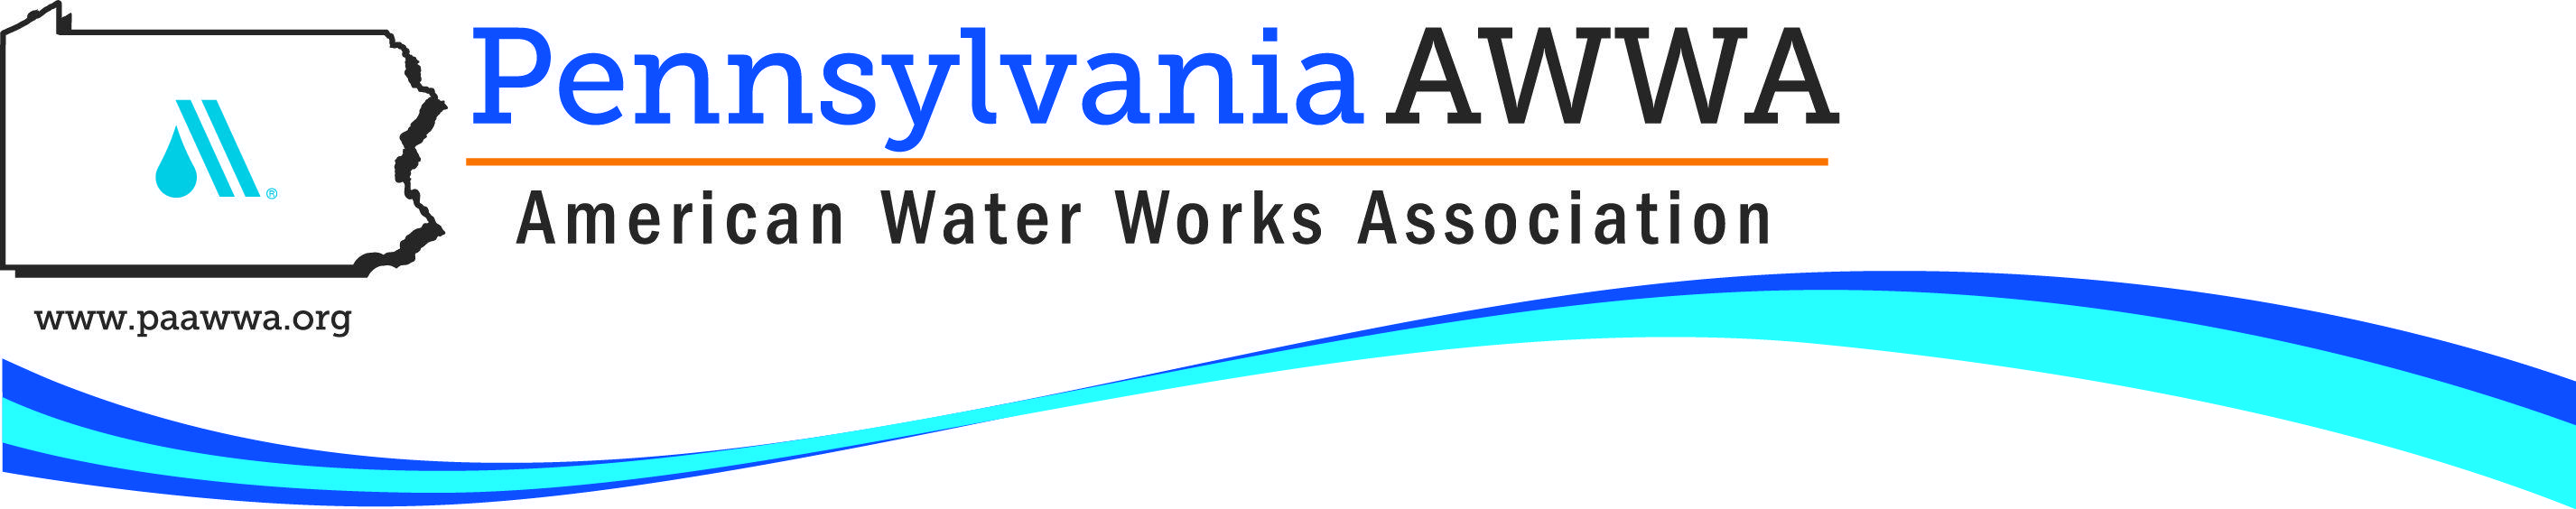 AWWA Logo - Annual Conference. American Water Works Association